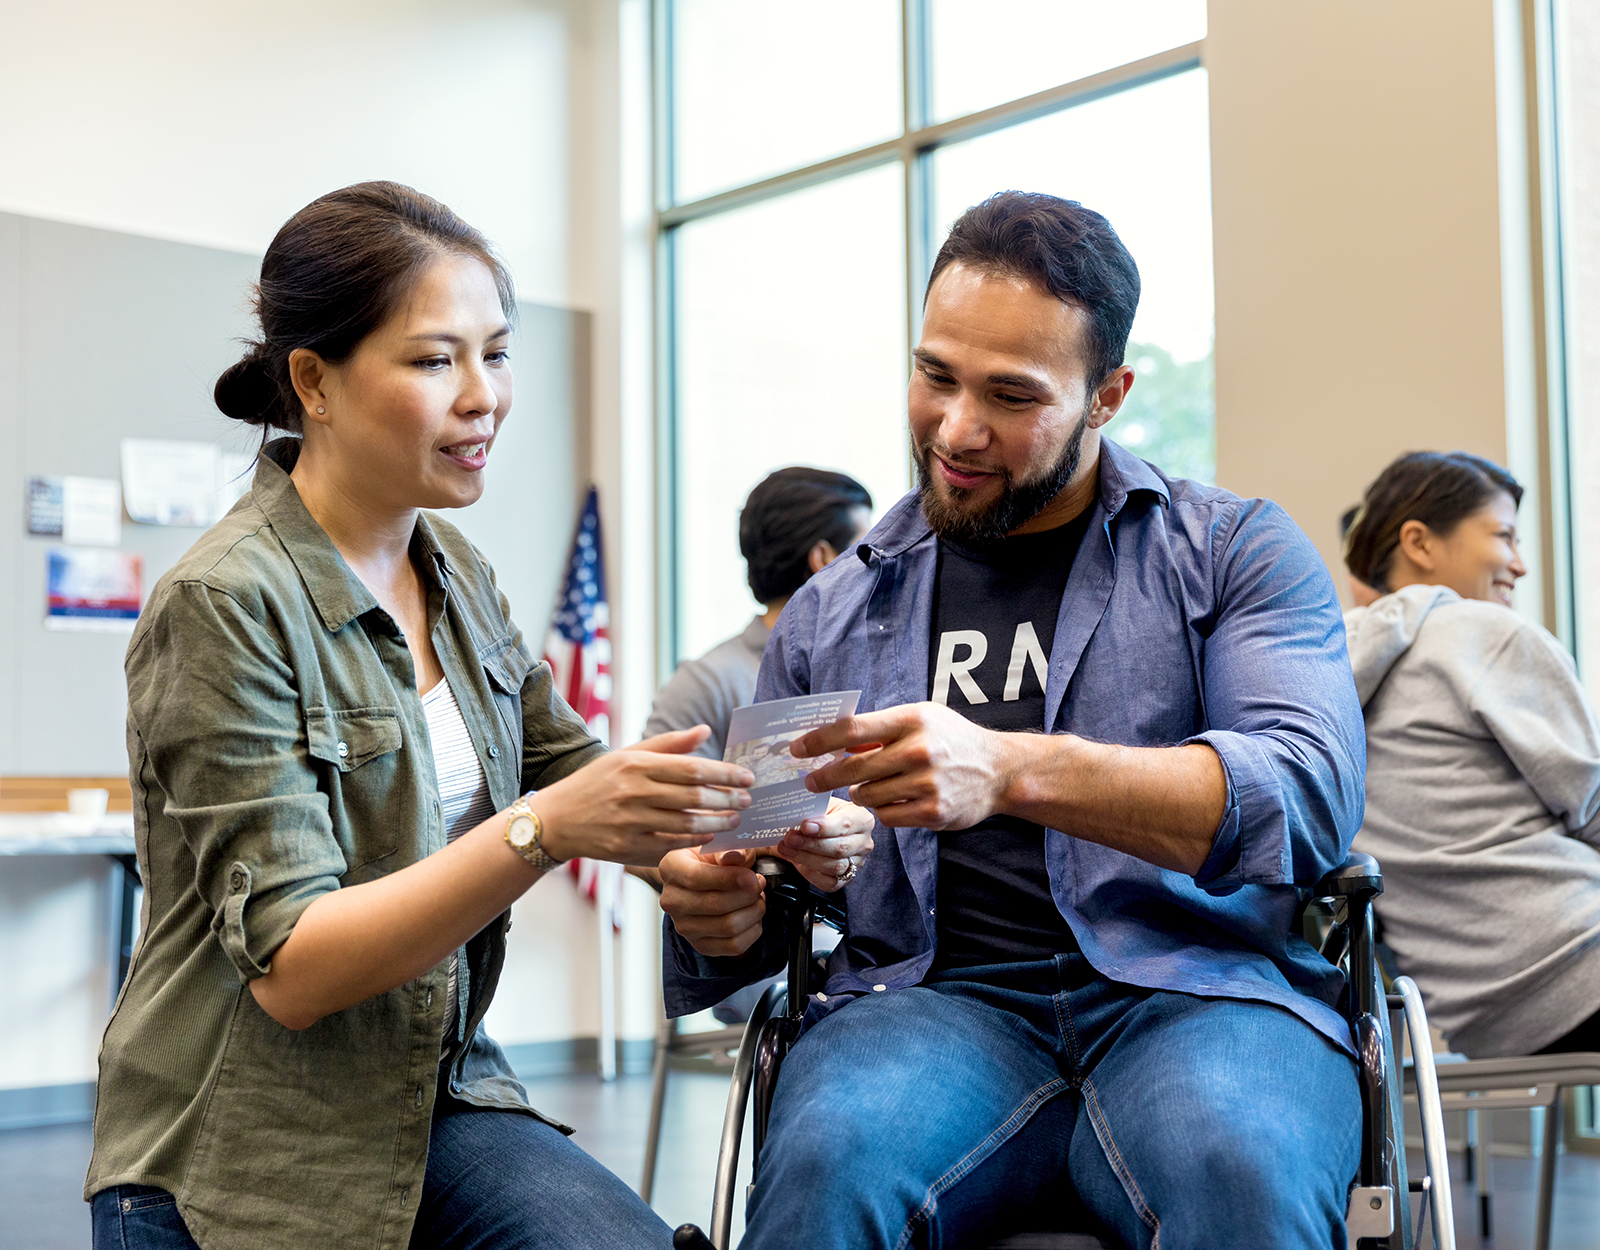 A male in a wheelchair showing a poster card to a female.